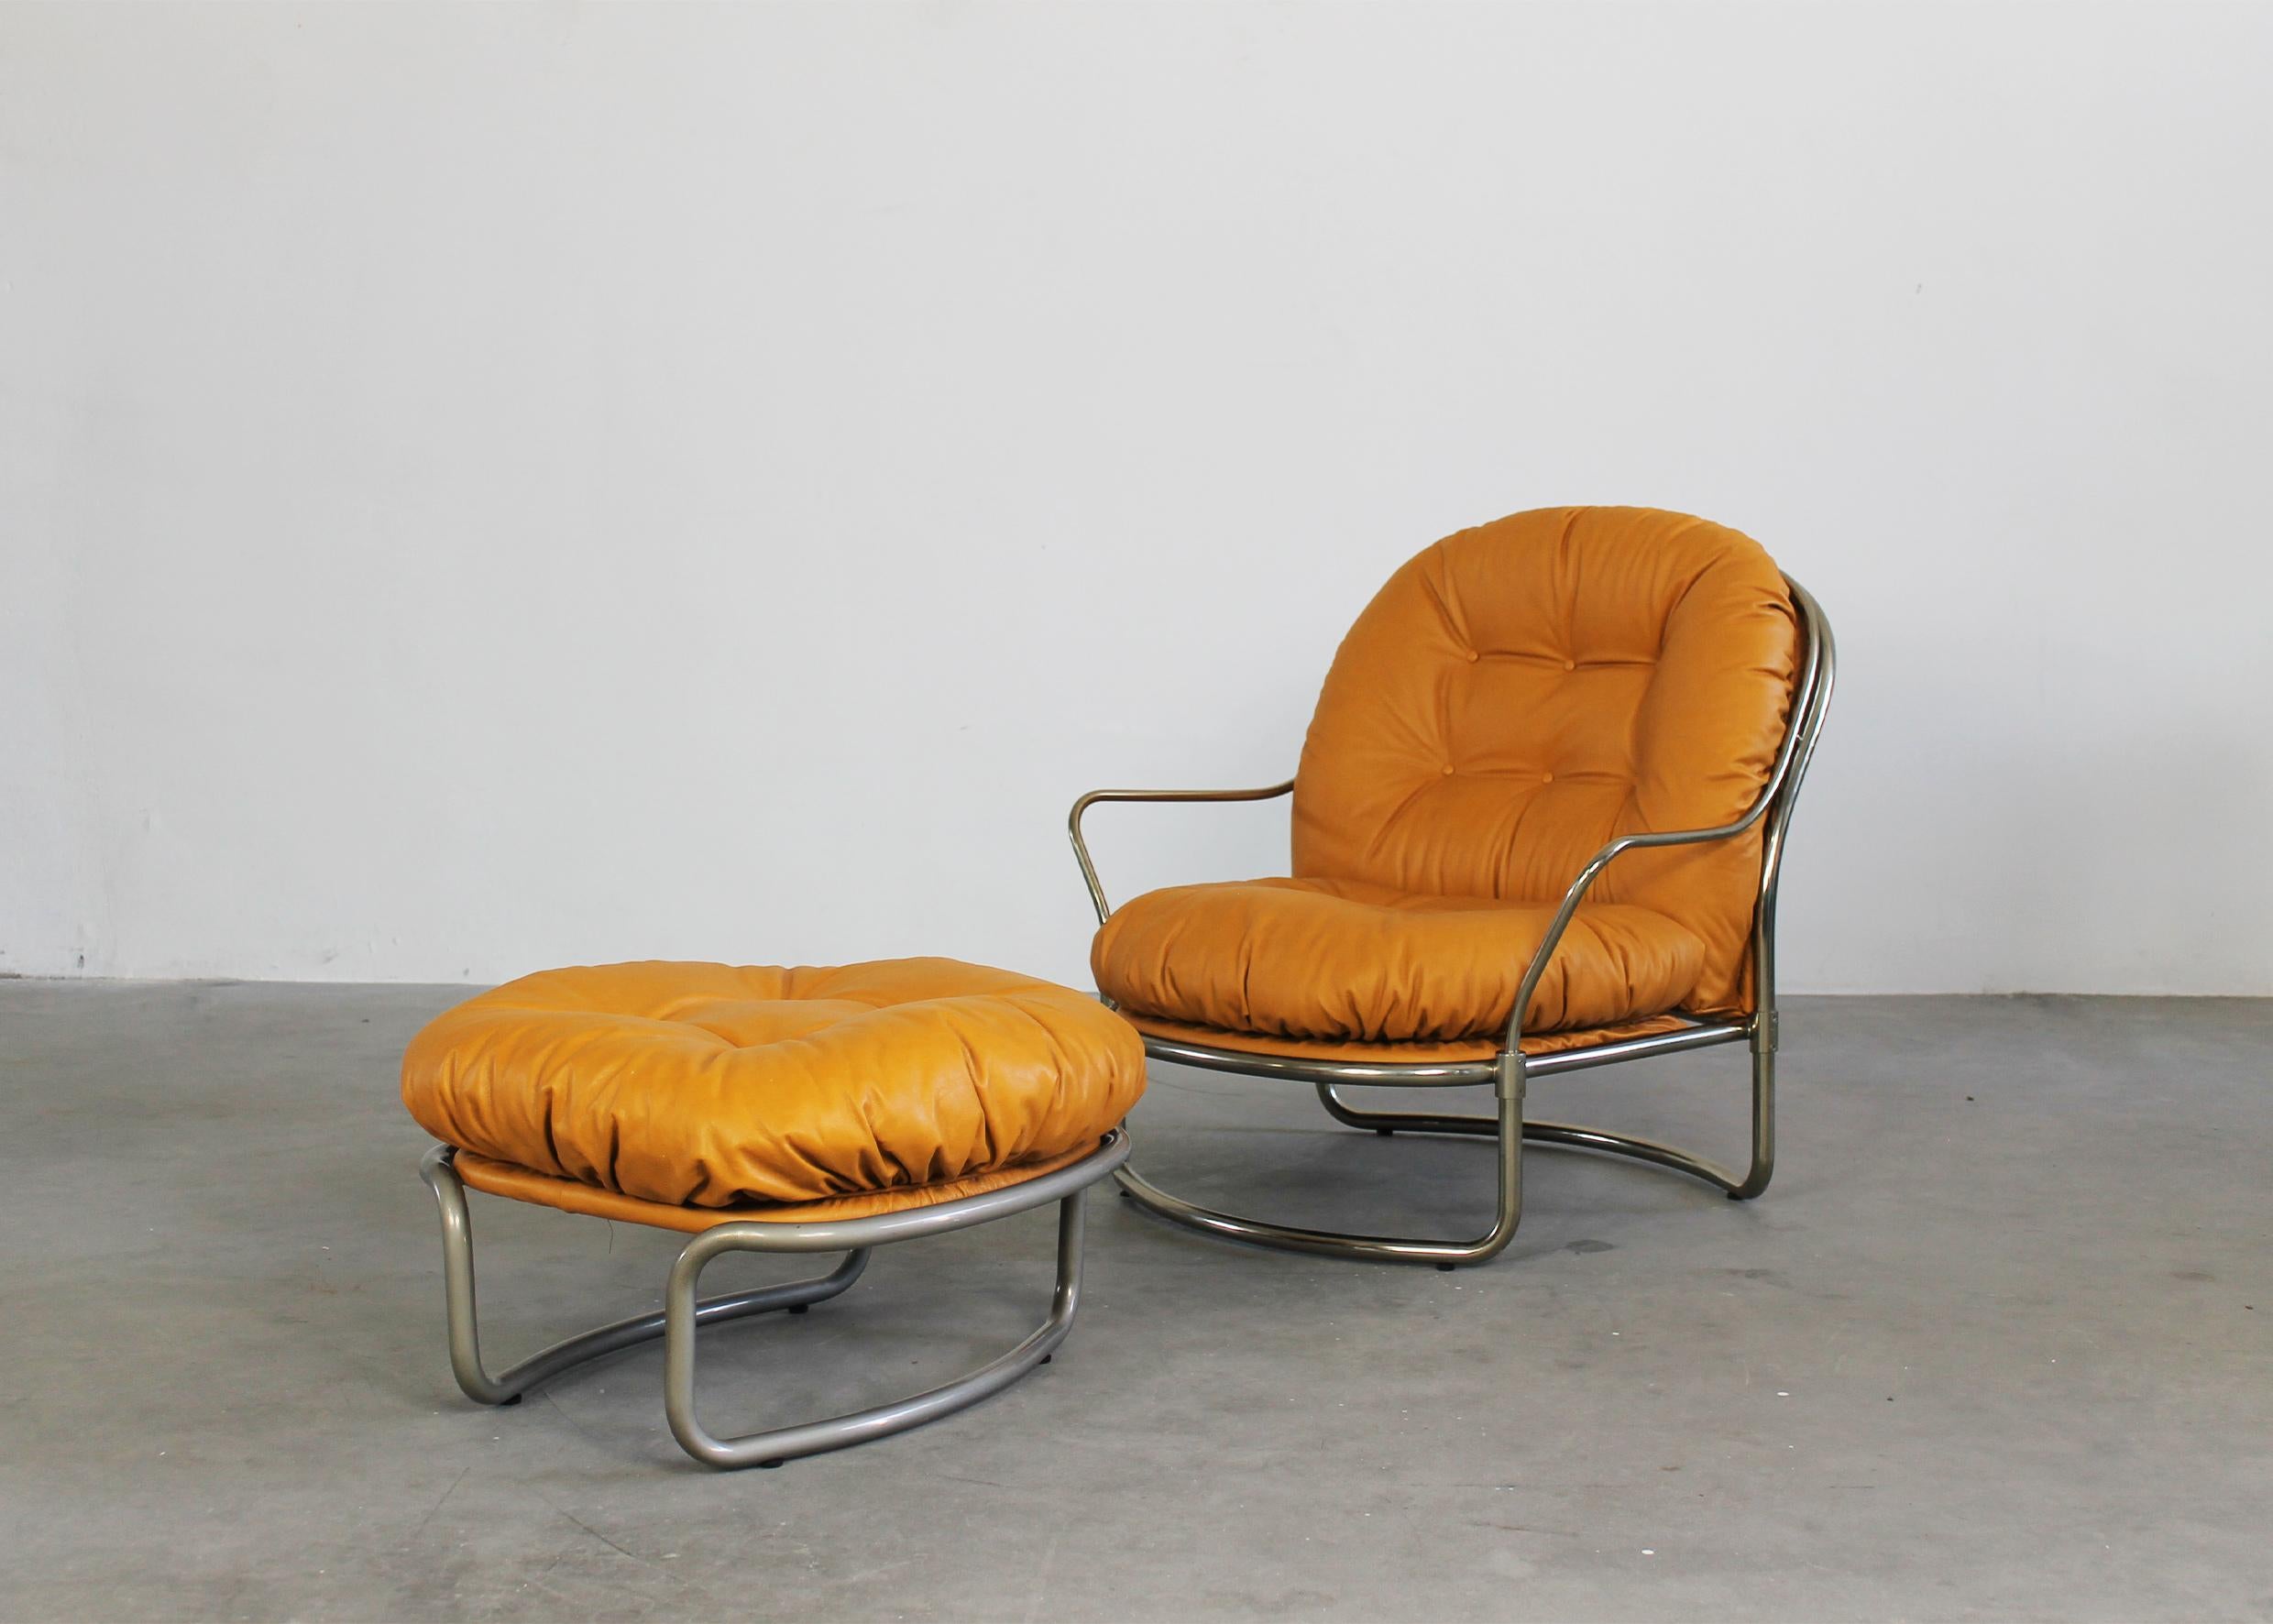 Set composed by a 915 armchair with a footrest both pieces are made in chromed metal and padded leather.
This set was designed by Carlo de Carli and produced by Cinova in the 1970s.

H88x87x87 cm (armchair)
H39x65x65 cm (footrest)

Carlo de Carli